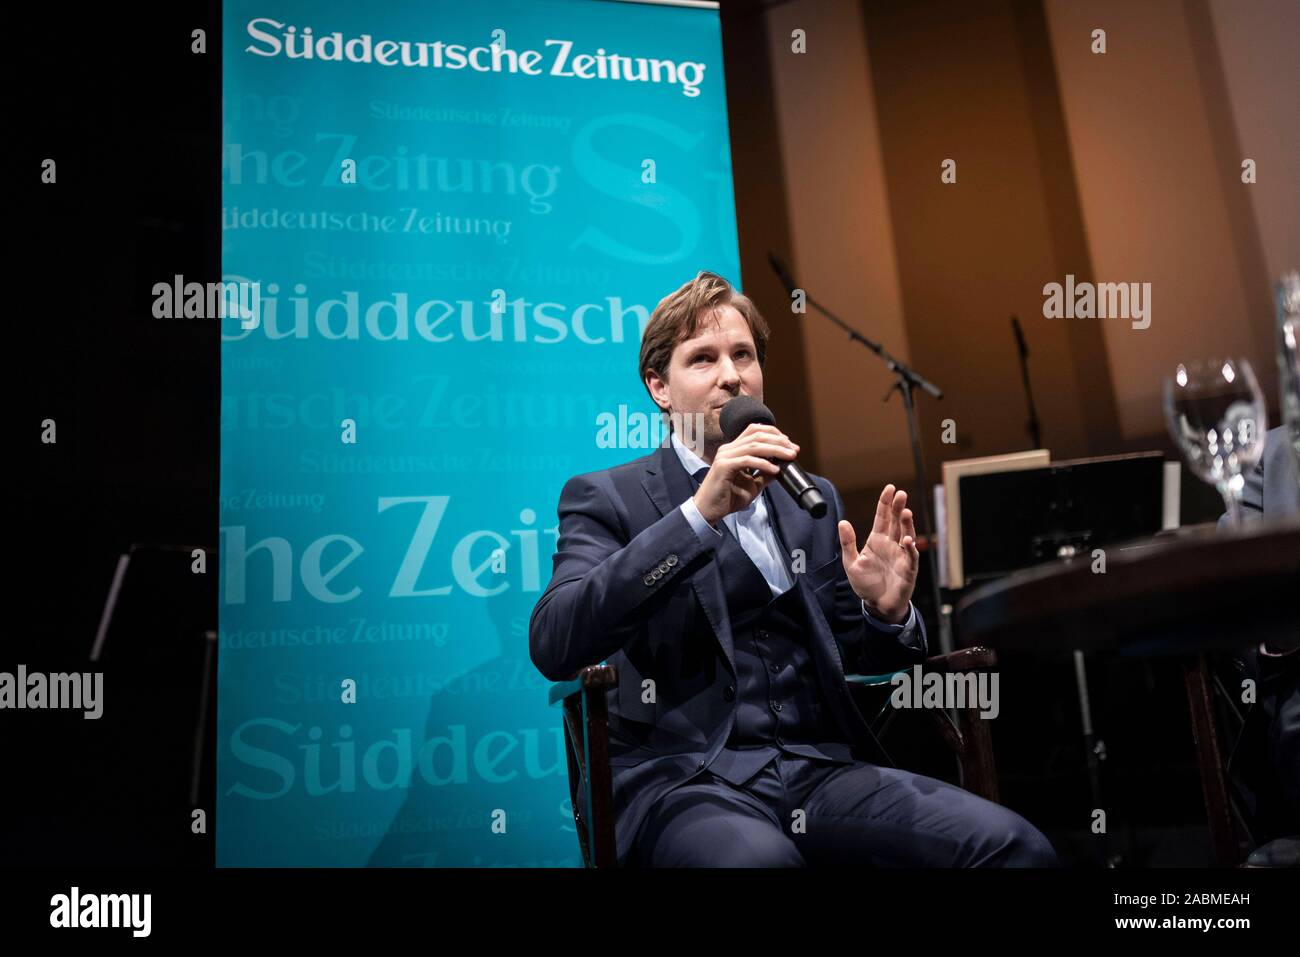 At the beginning of the series 'Wärme und Wallung' of the 'Süddeutsche Zeitung' and the Munich Chamber Orchestra, Clemens Schuldt, Stefan Kornelius and Theo Waigel discuss Germany 30 years after reunification at the Prinzregententheater in Munich: The conductor of the MKO Clemens Schuldt. [automated translation] Stock Photo